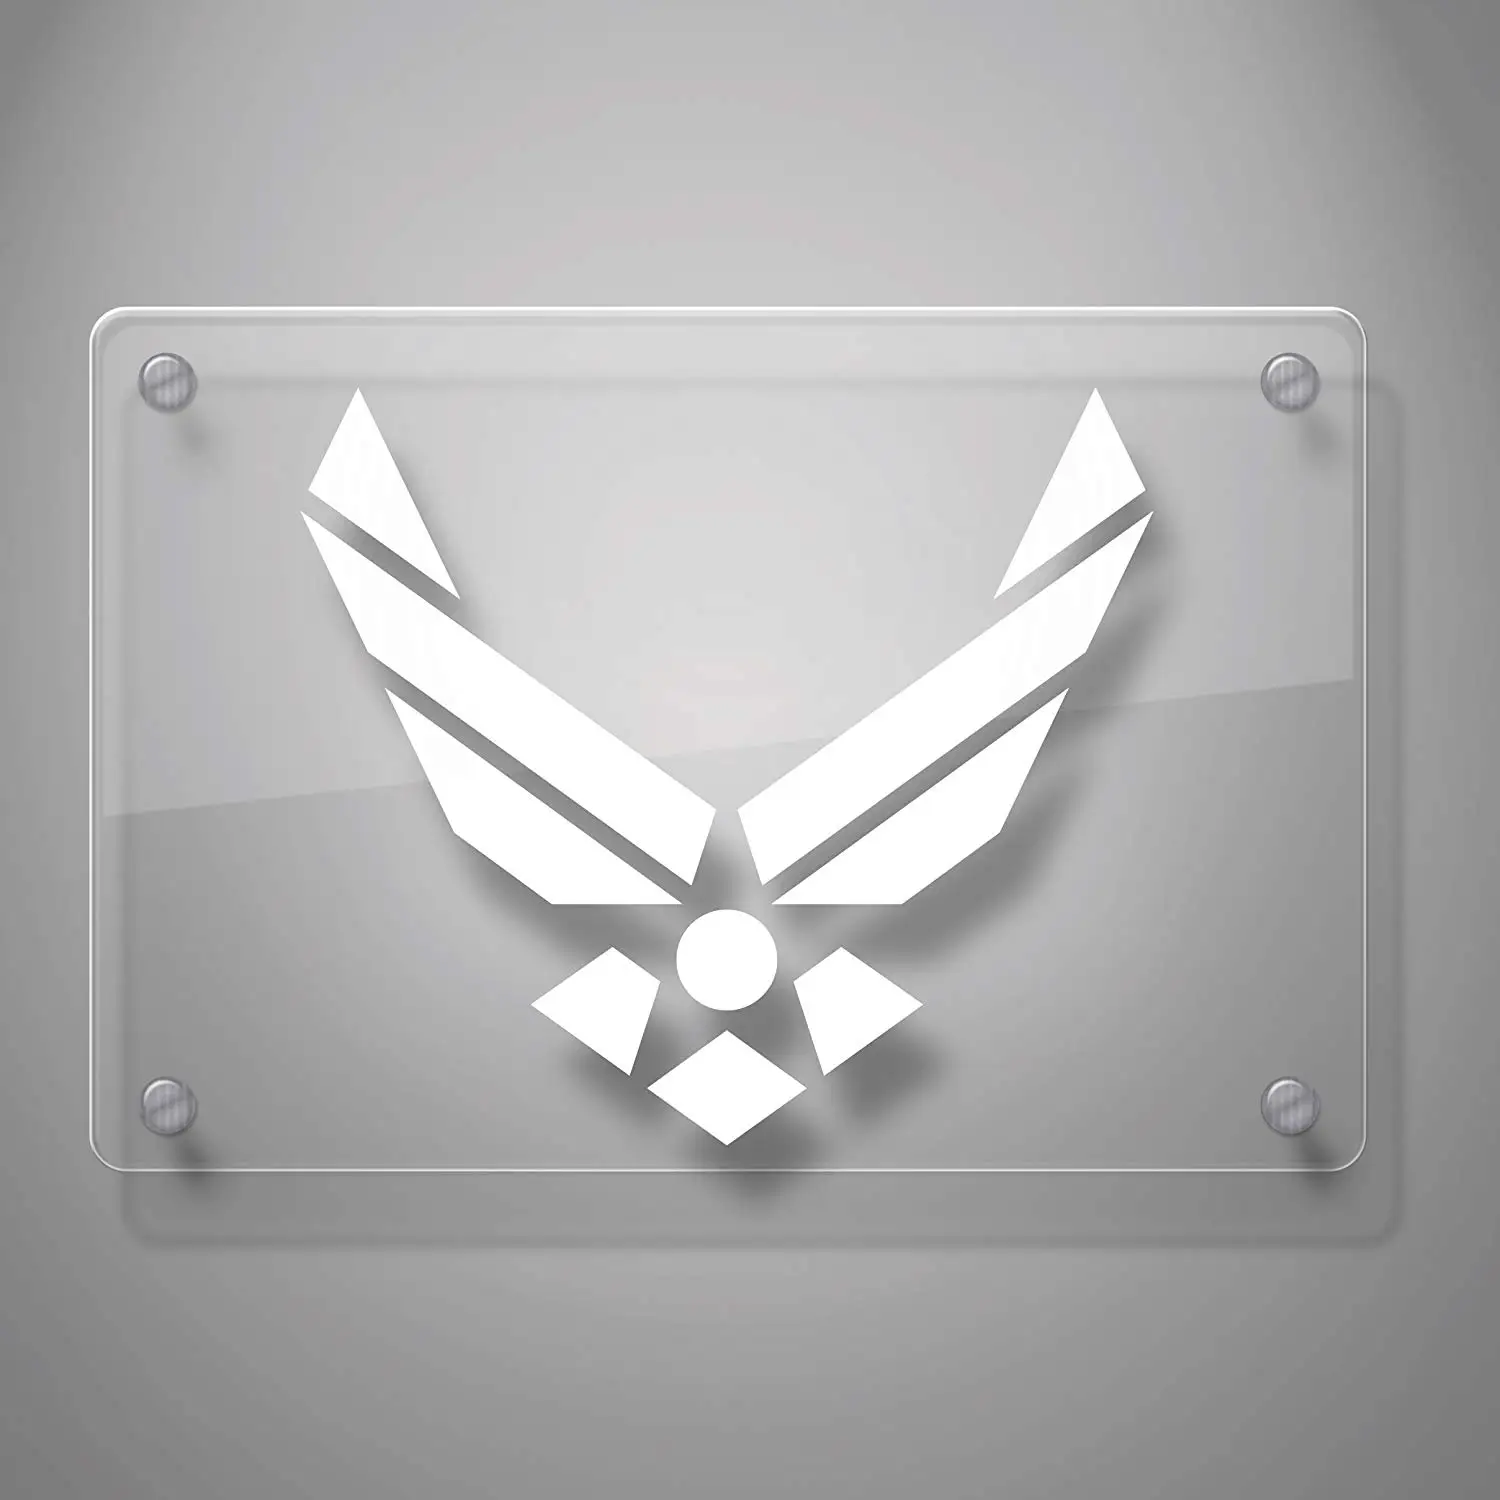 

Yoonek Graphics Air Force Decal Sticker for Car Window, Laptop, Motorcycle, Walls, Mirror and More. # 561 (4